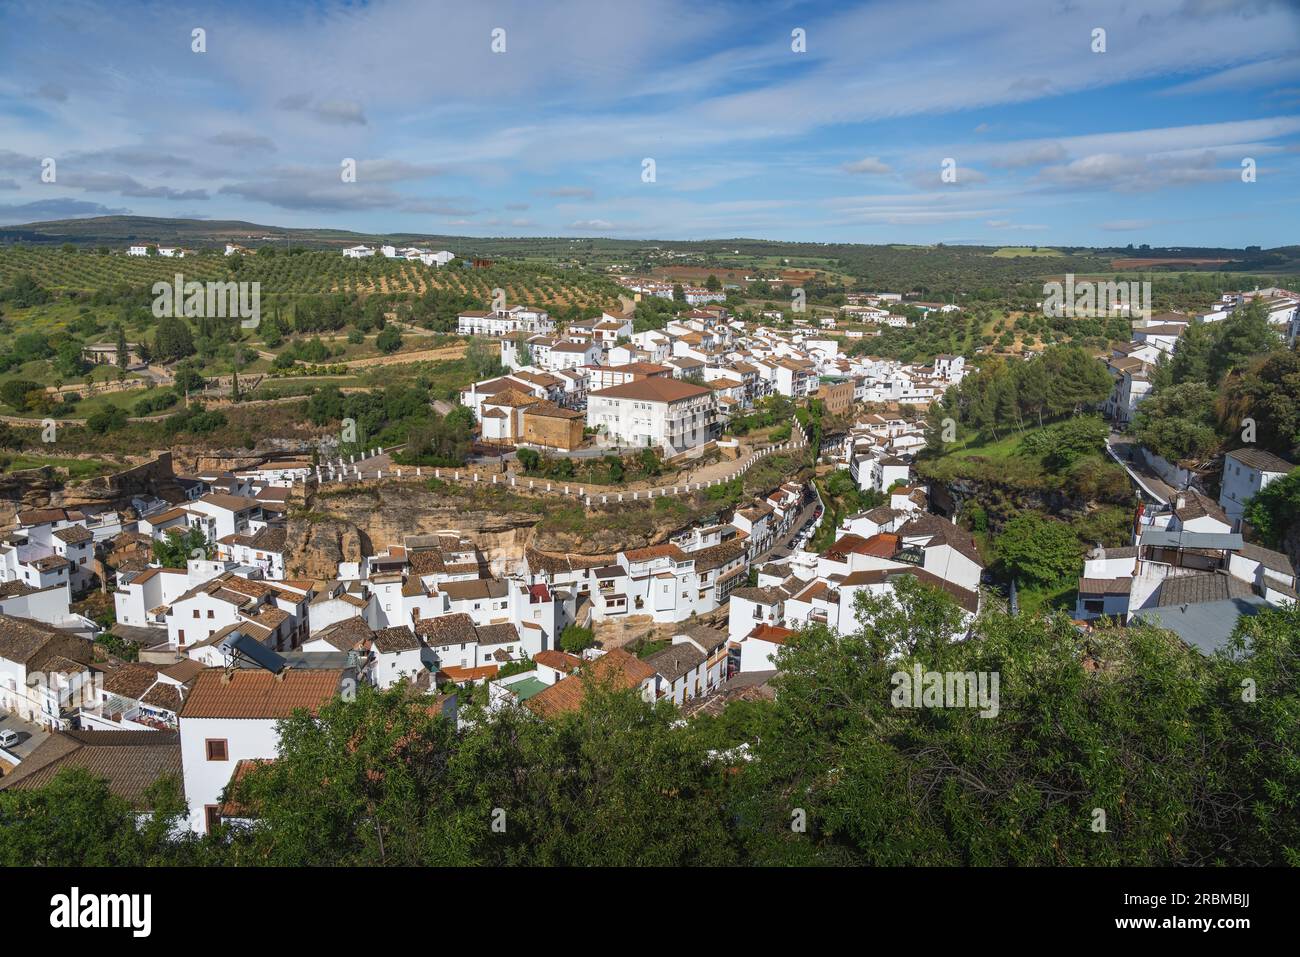 Aerial view of City with Rock Overhangs - Setenil de las Bodegas, Andalusia, Spain Stock Photo